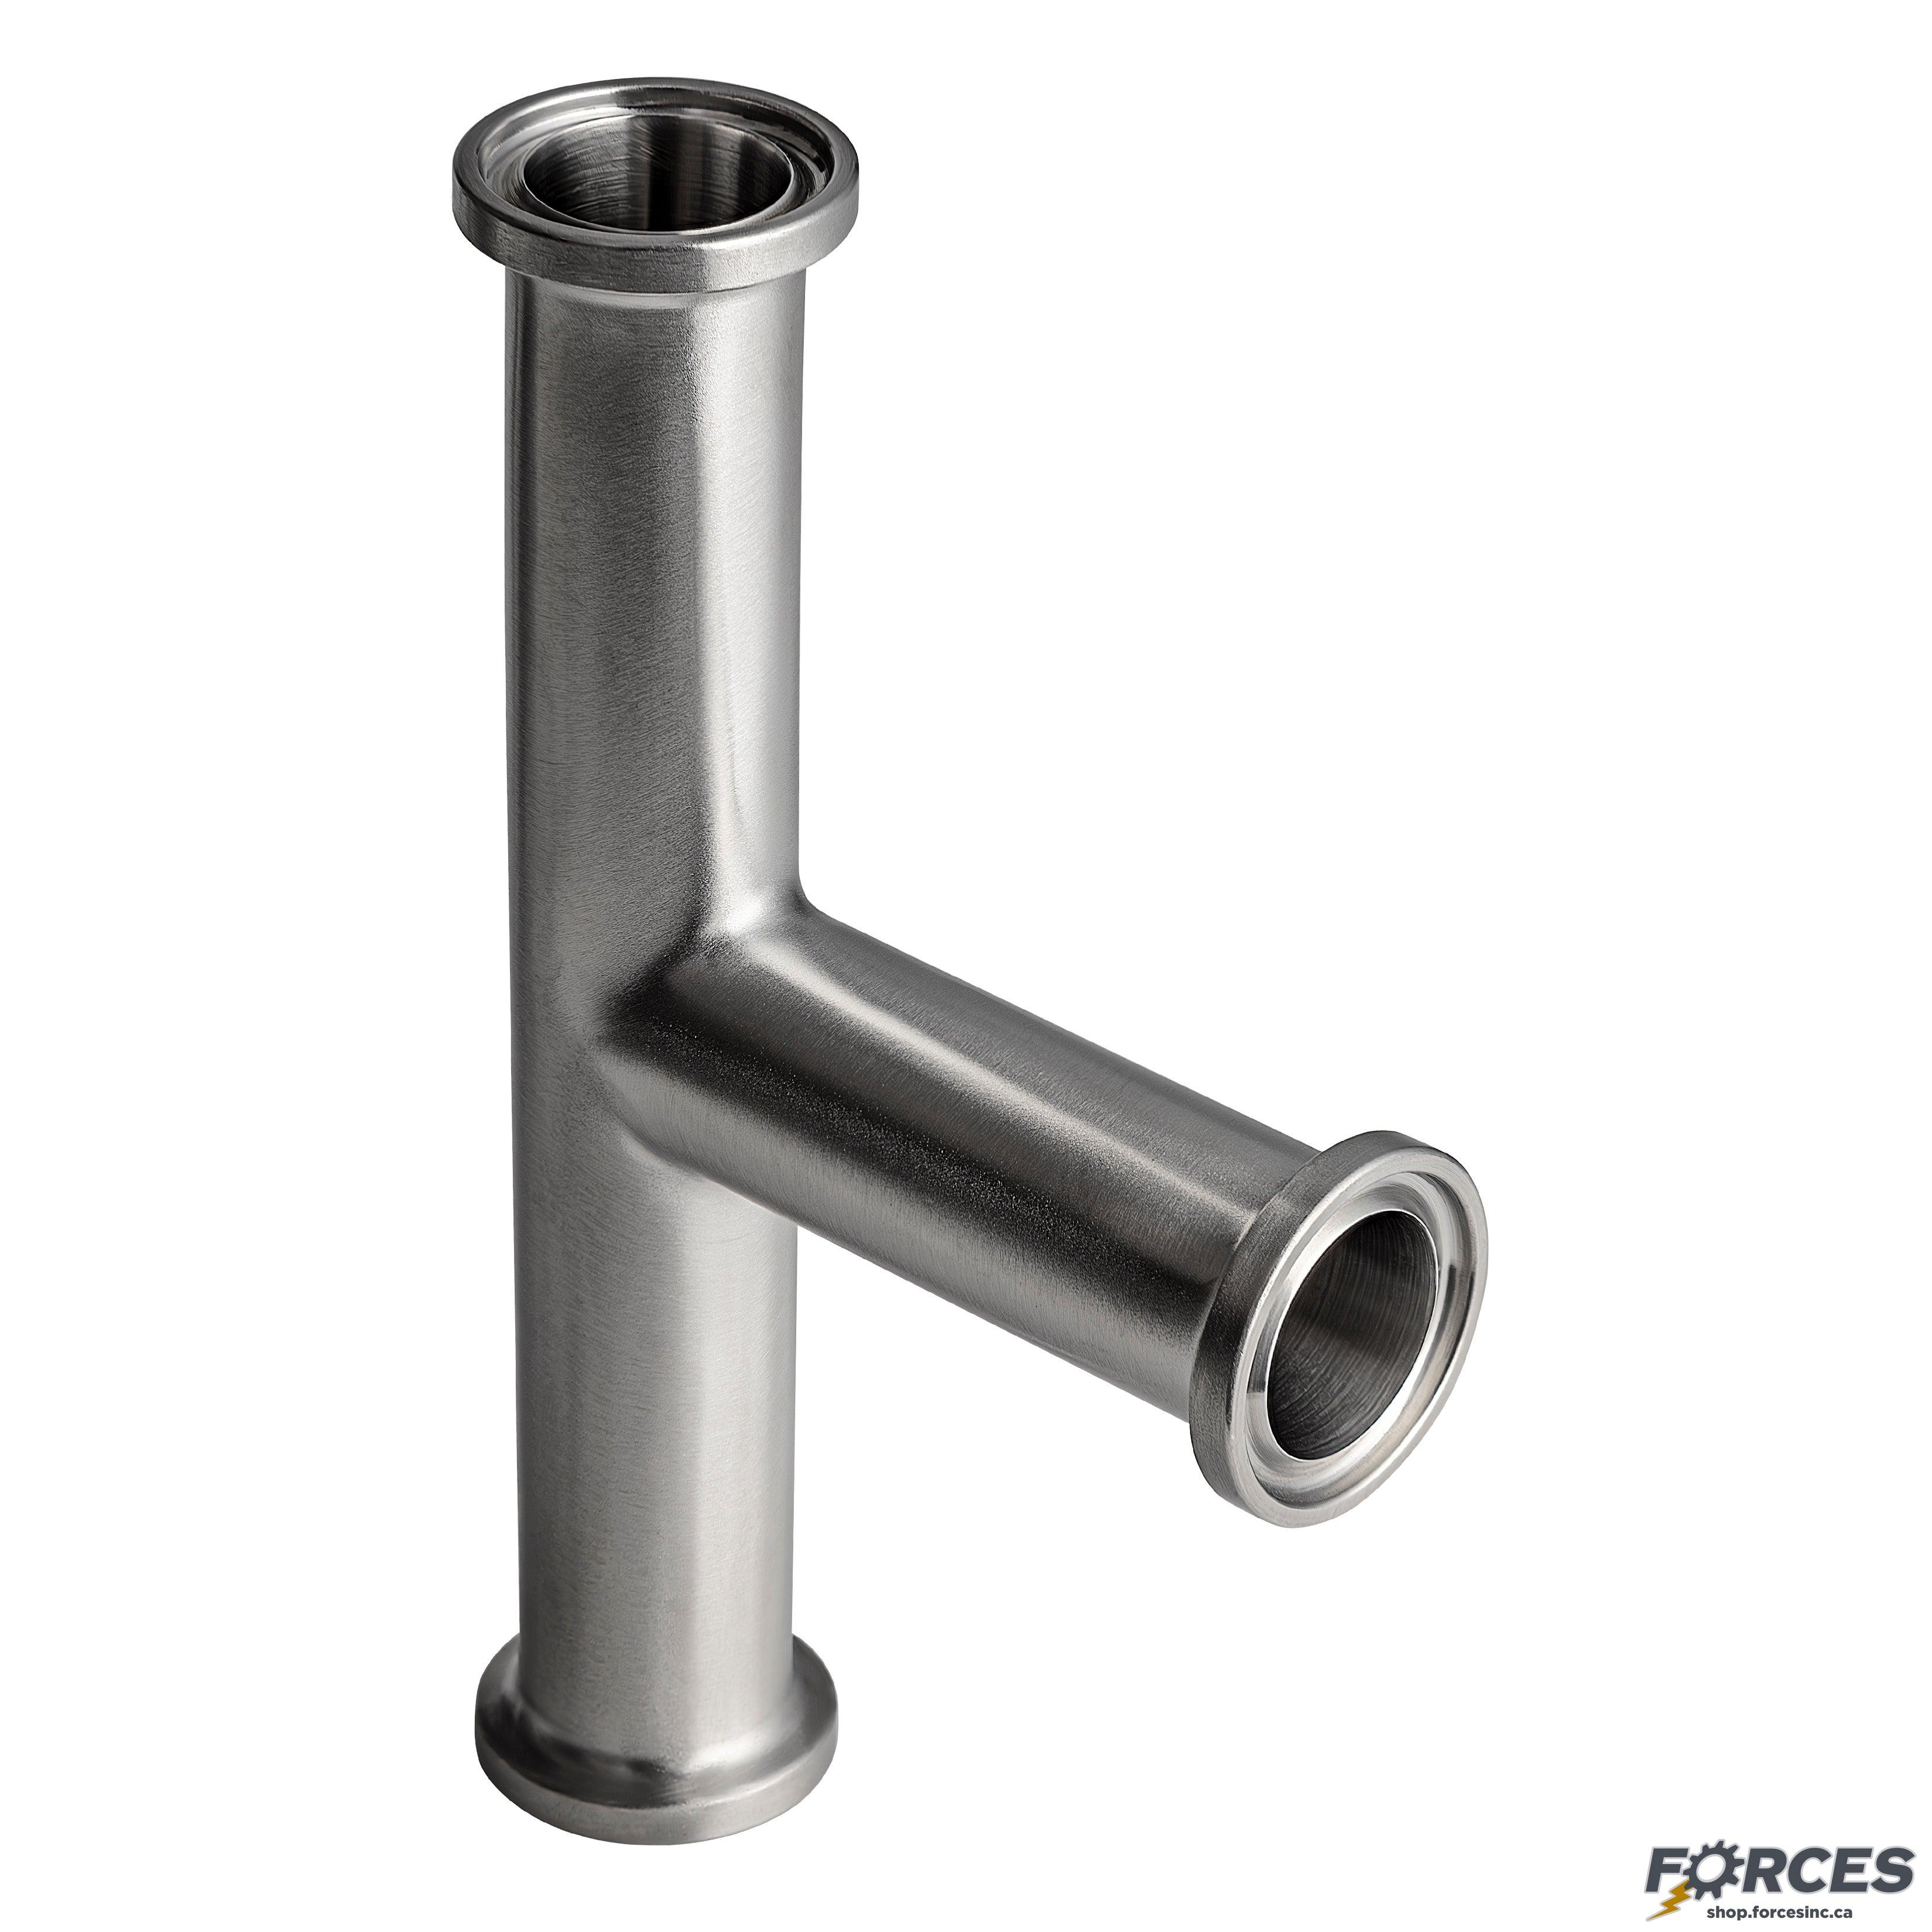 3" Tri-Clamp Tee - Stainless Steel 316 - Forces Inc